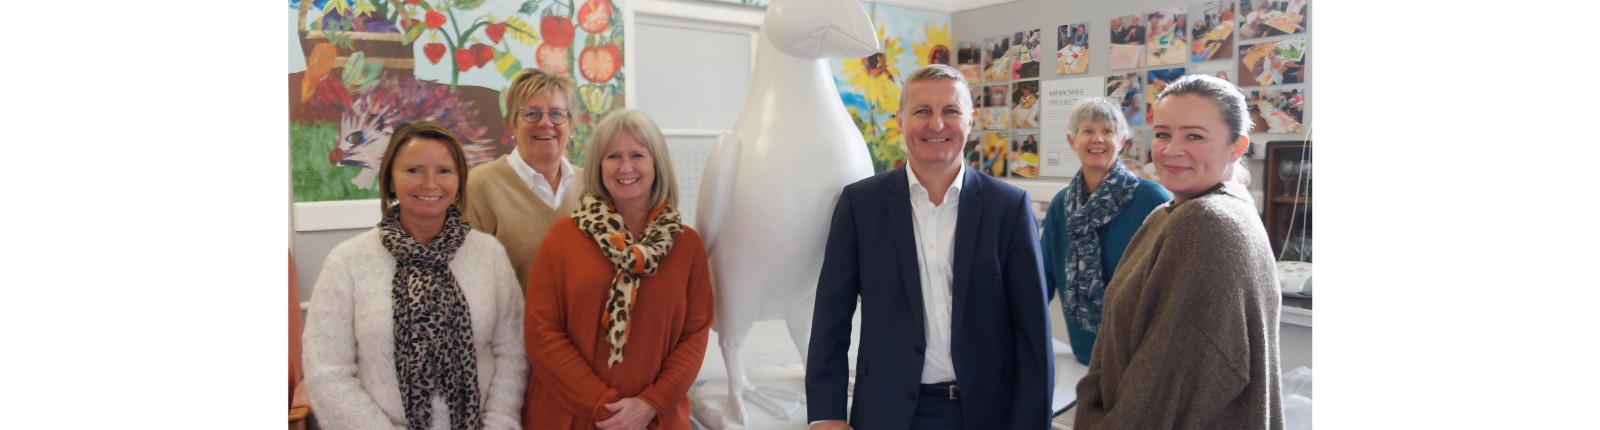 Introducing ‘Buroo’ the Puffin…GOWER signs up for the Guernsey Puffin Parade